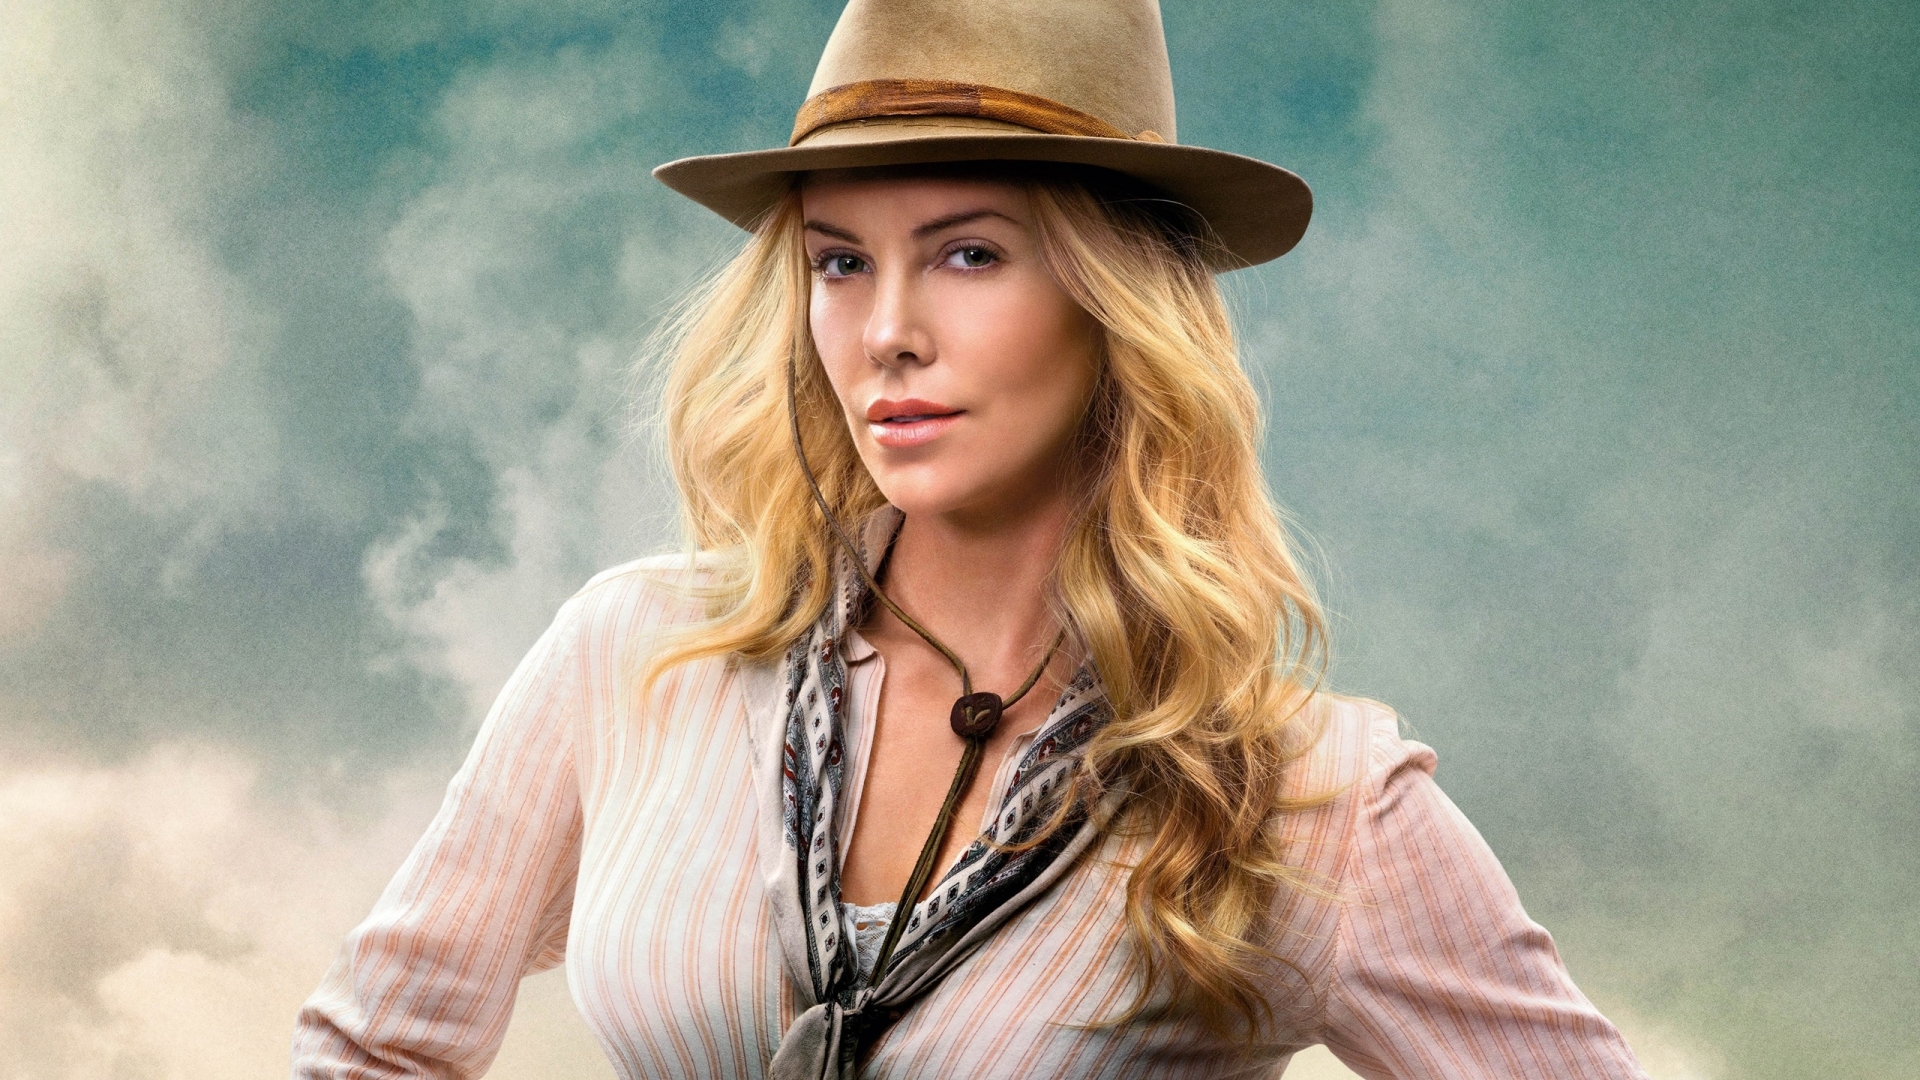 Charlize Theron in A Million Ways to Die in the West for 1920 x 1080 HDTV 1080p resolution